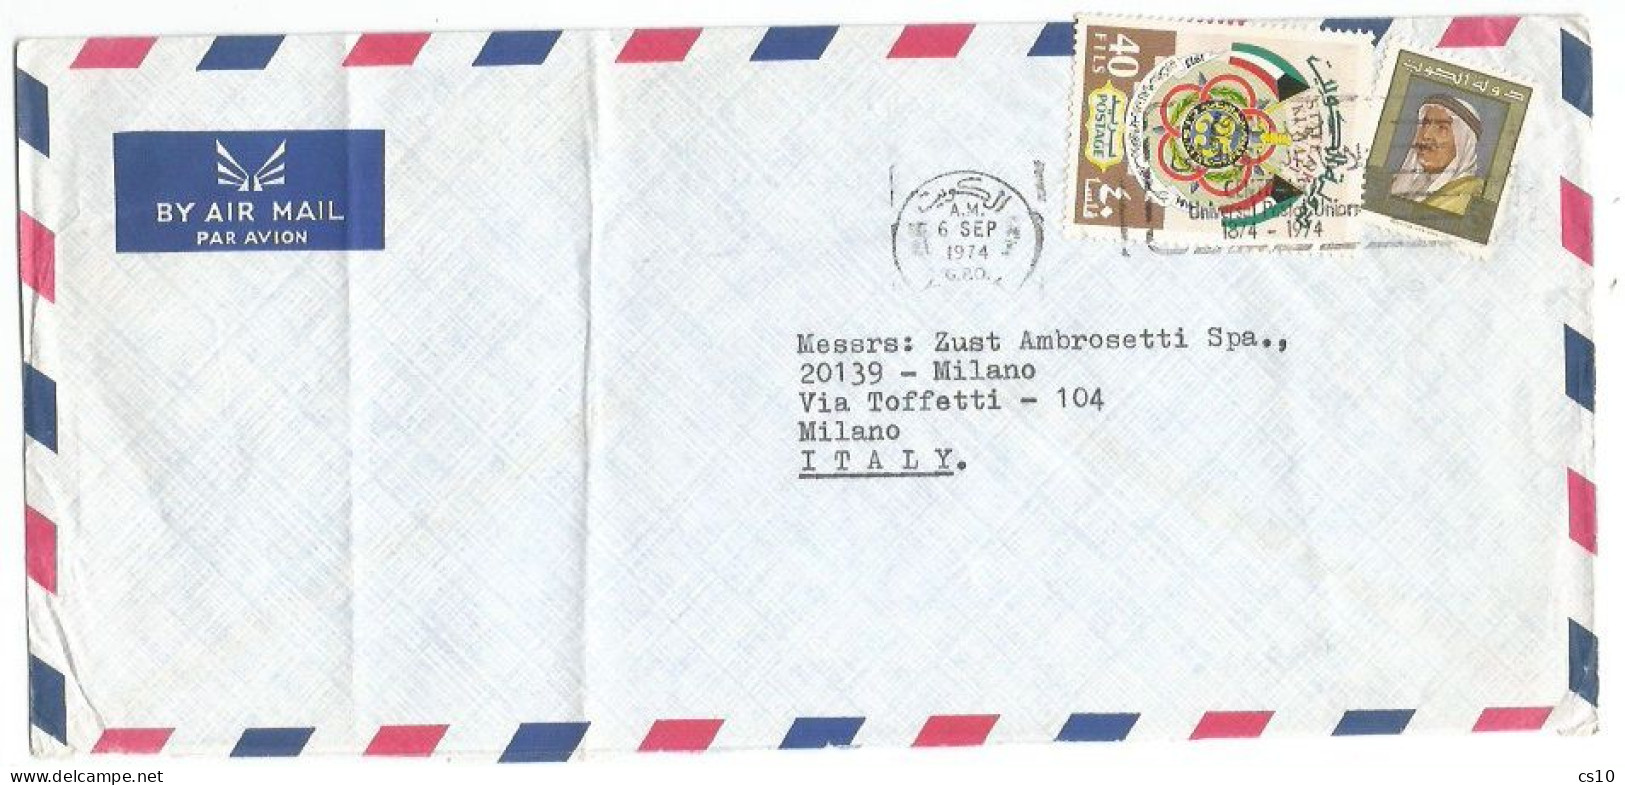 Kuwait  AirMail Commerce CV Safat 6sep1974 With CISM 25th Anyversary F.40 + Prince F.50 - Kuwait